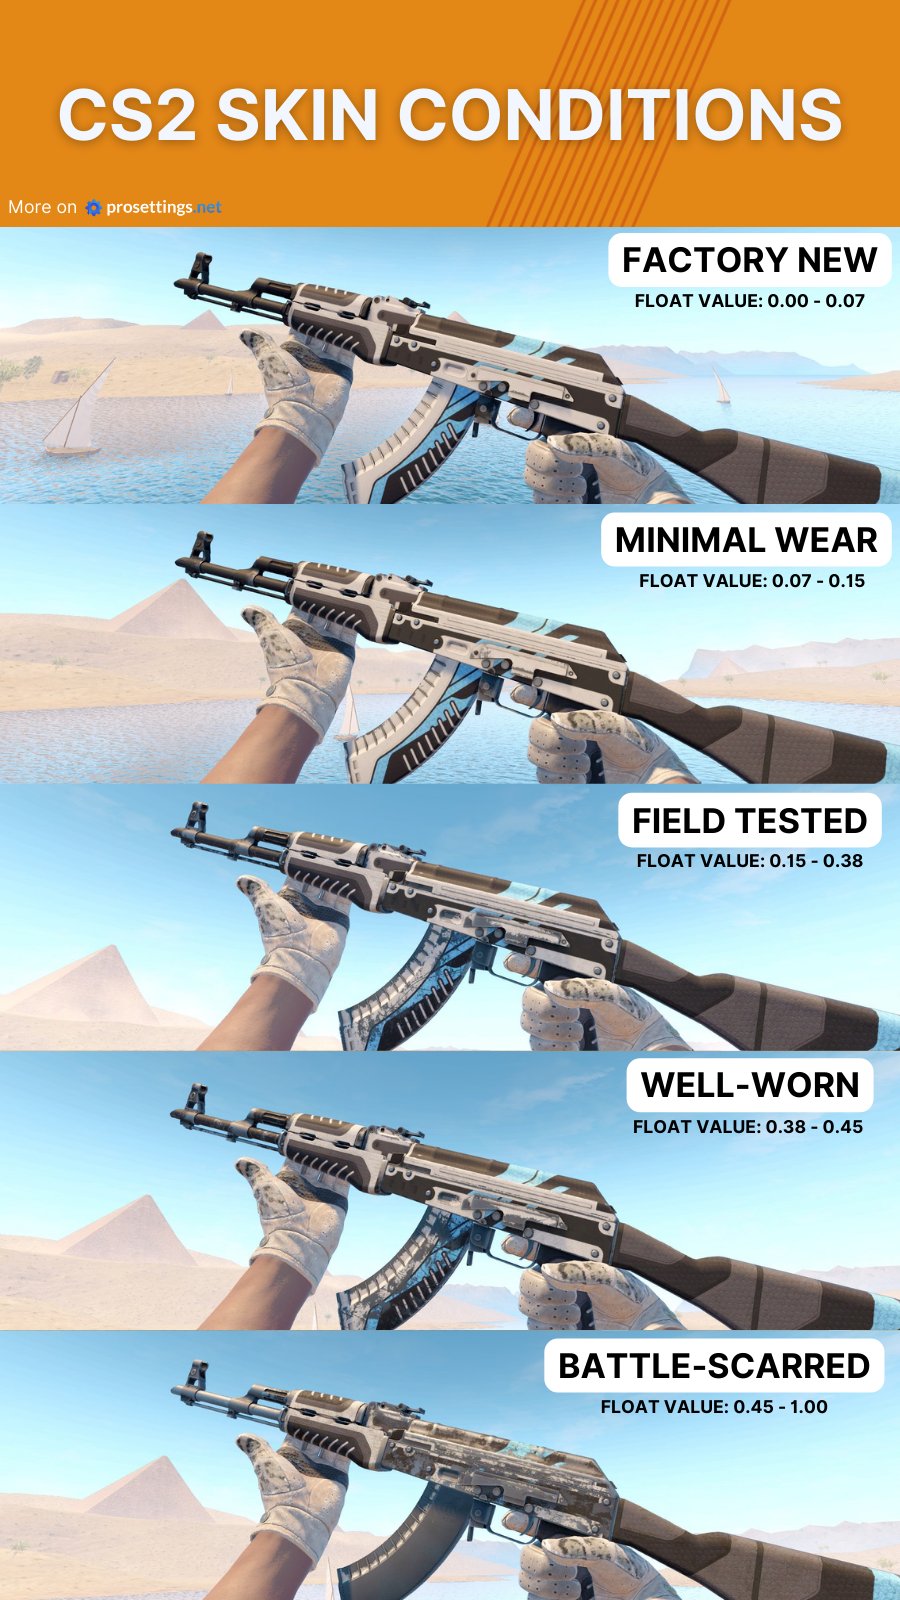 CS2 Skin Conditions Explained - All CS2 Skin Wears and Their Float Values